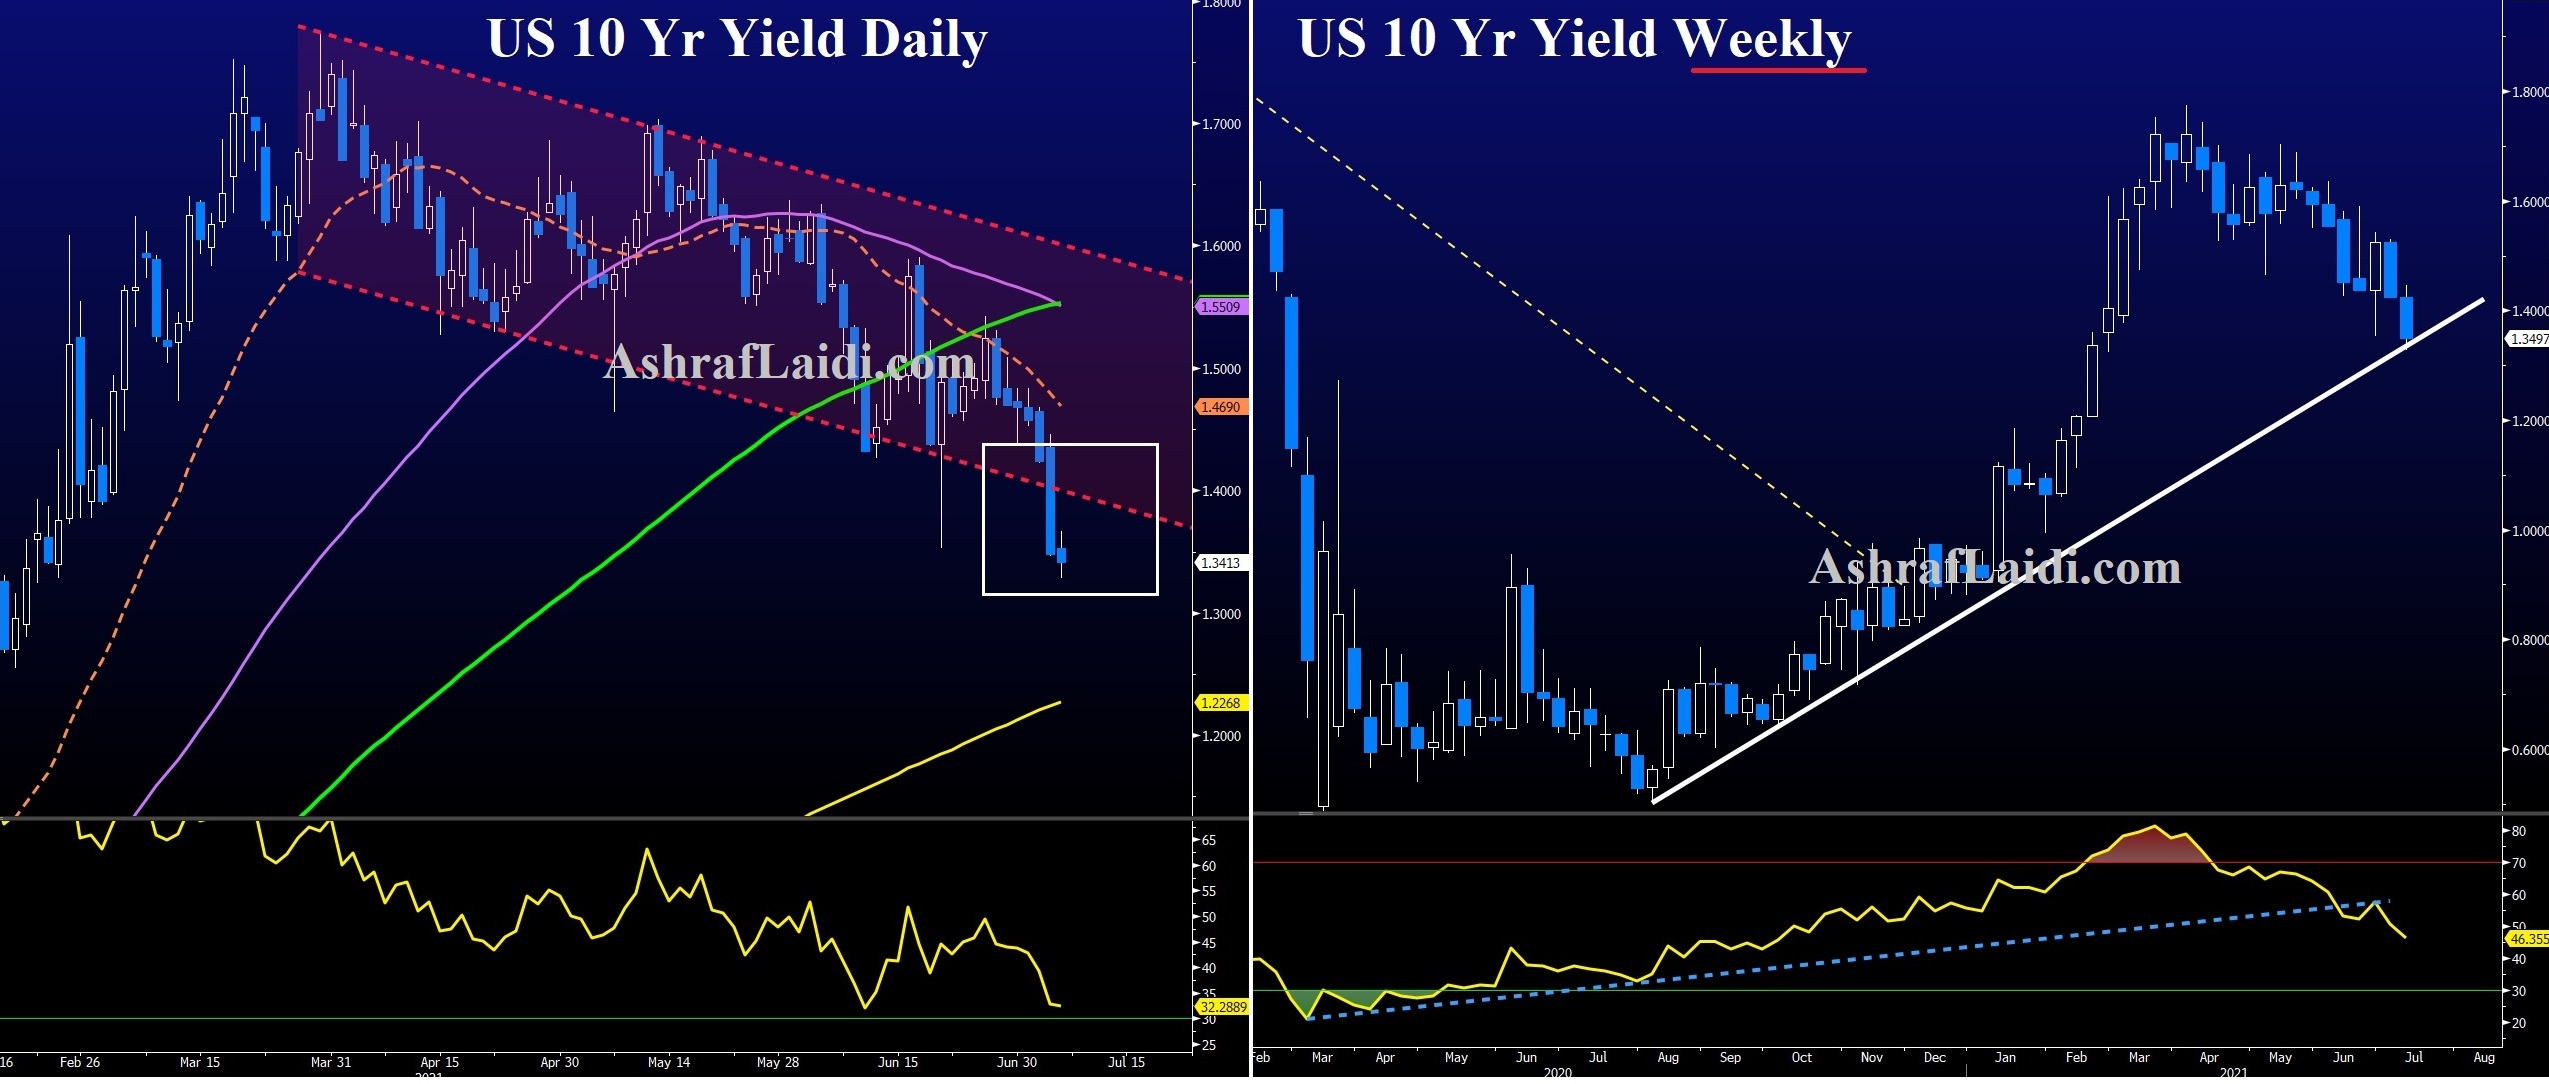 US 10 Yr Yield Daily And Weekly Chart